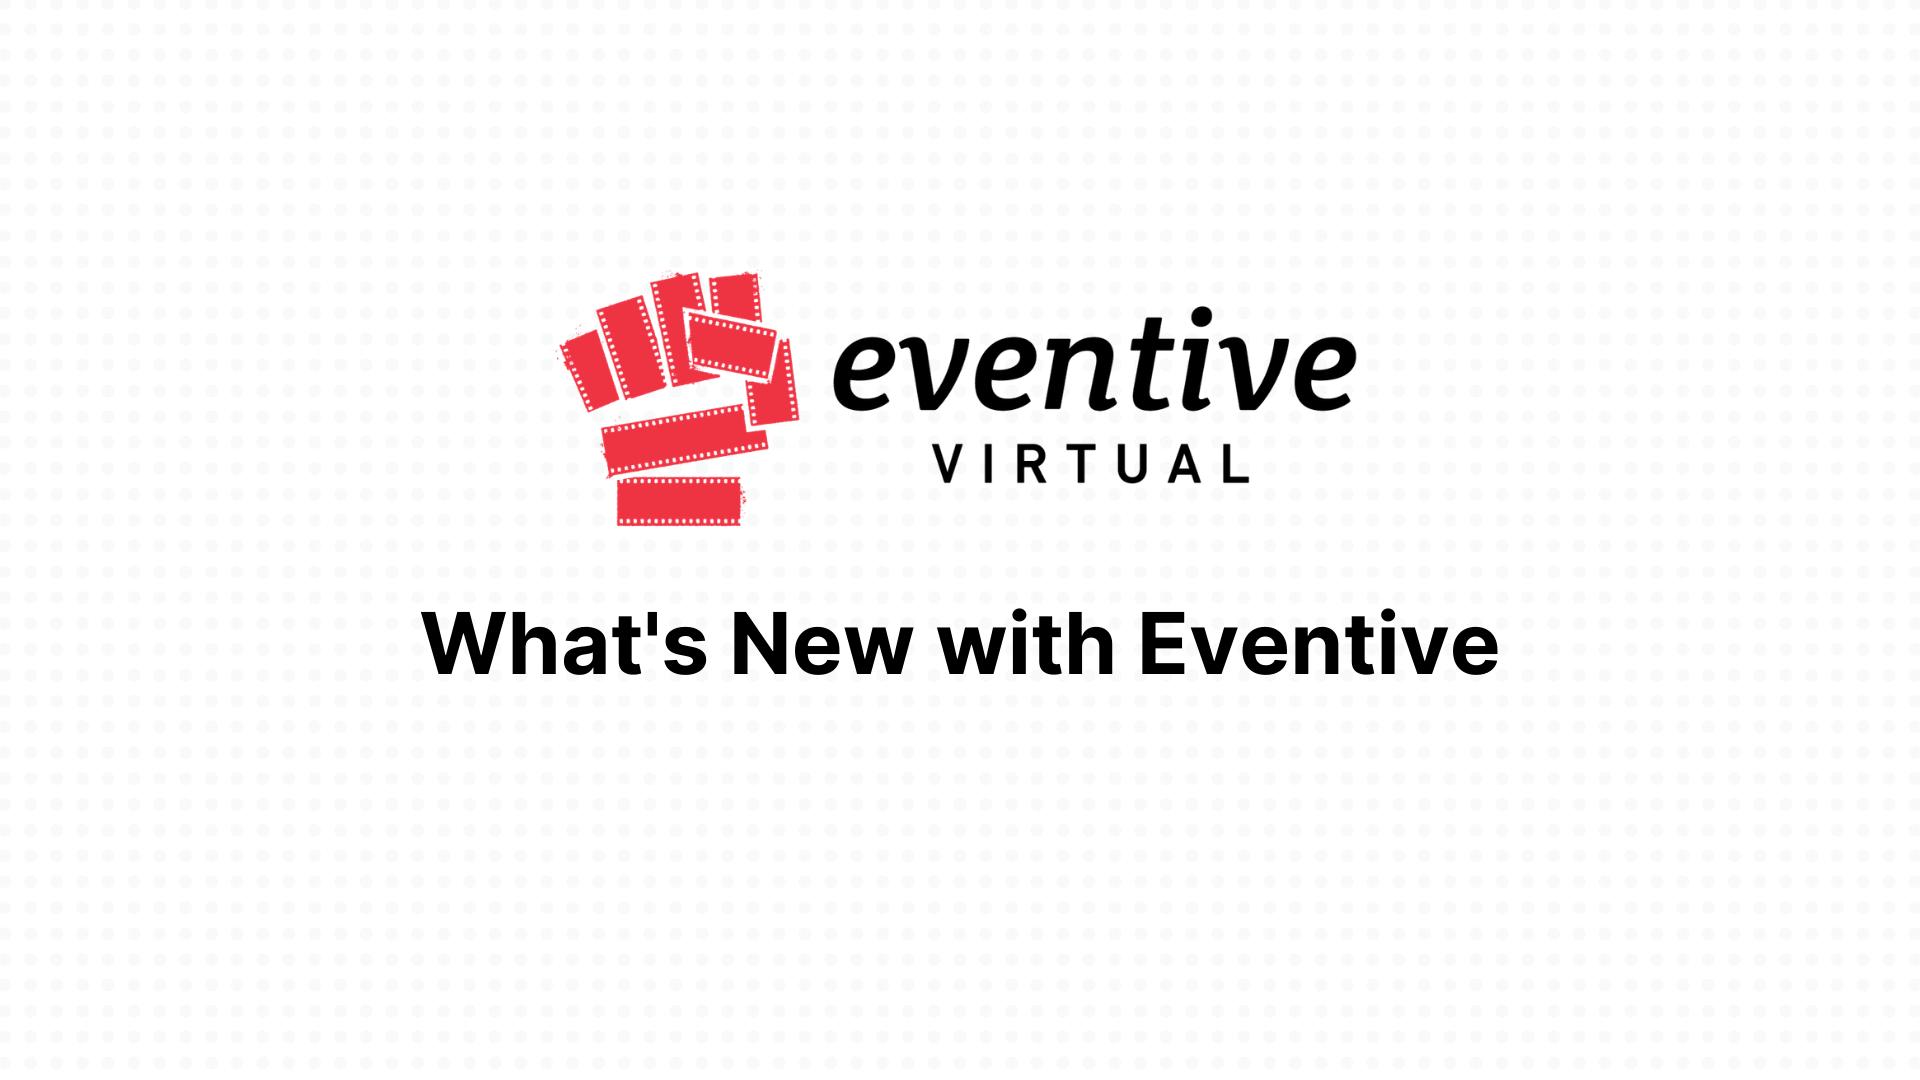 What's New with Eventive